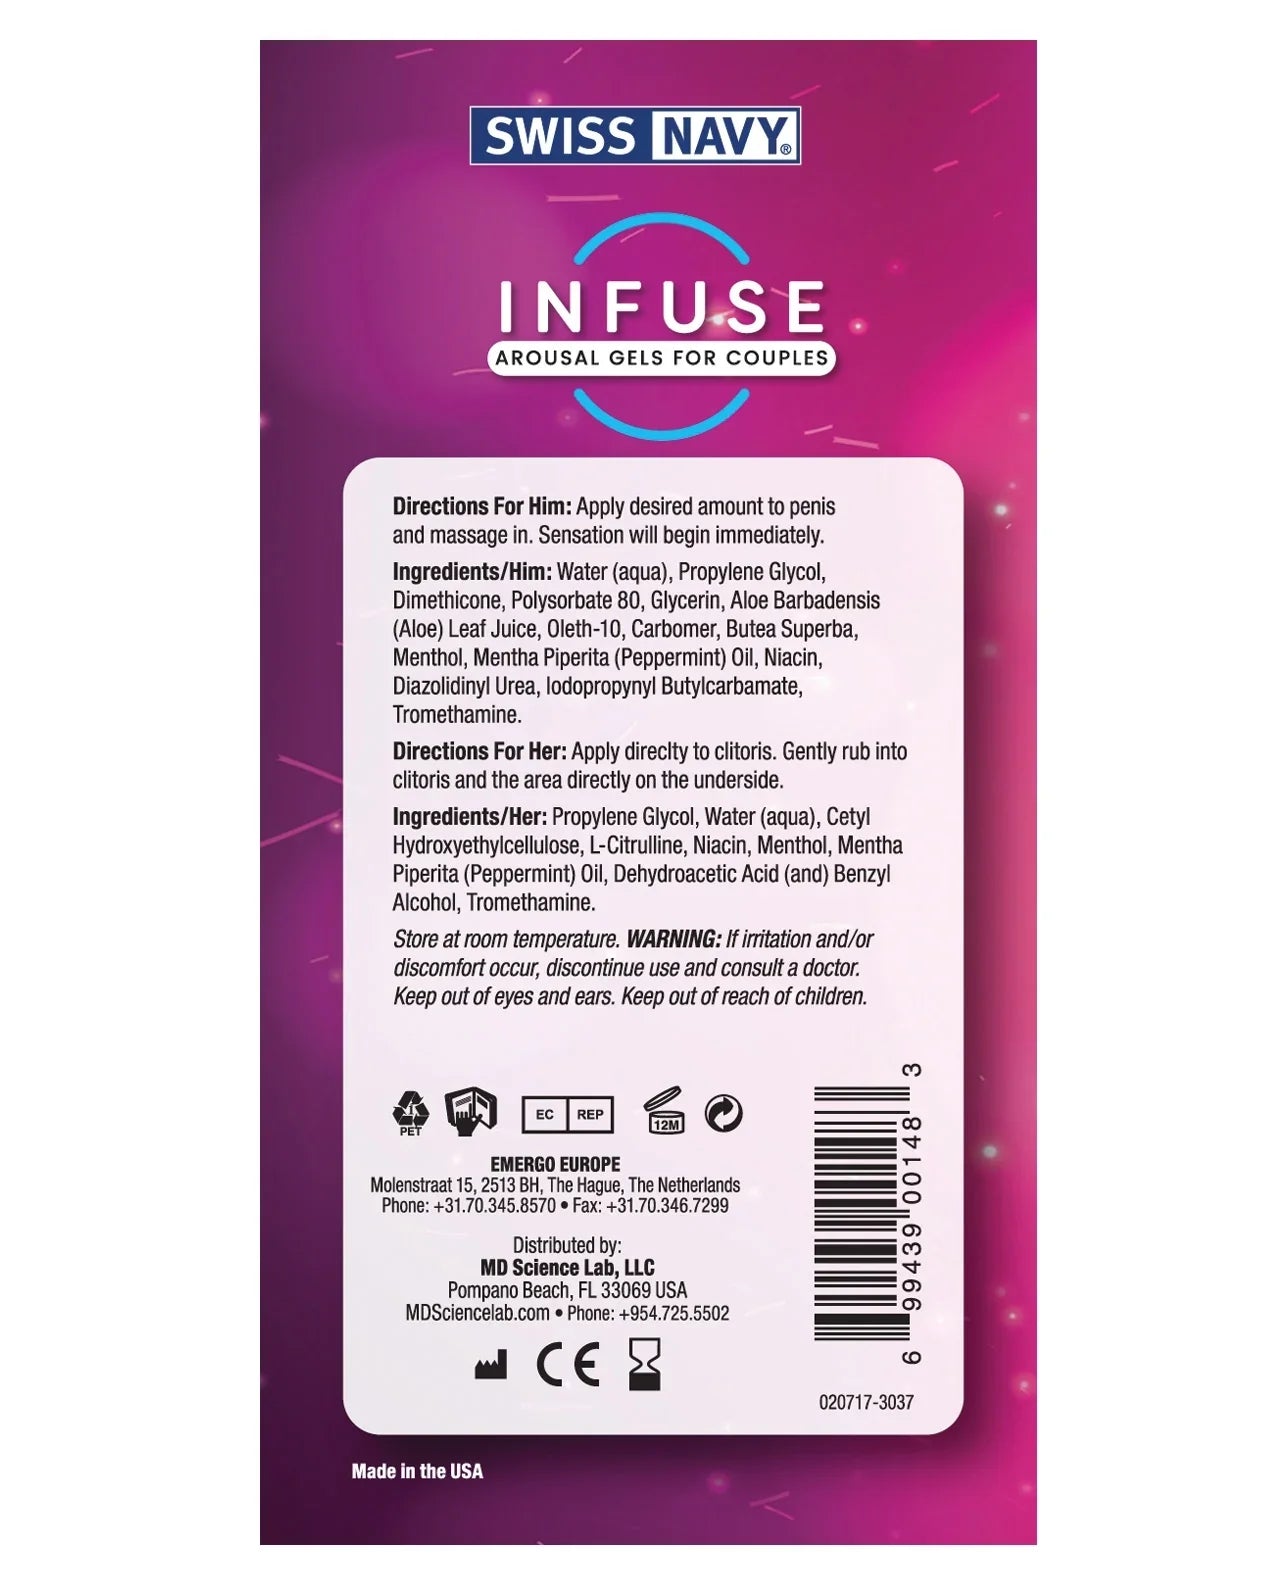 Swiss Navy Infuse • Arousal Water Lubricant